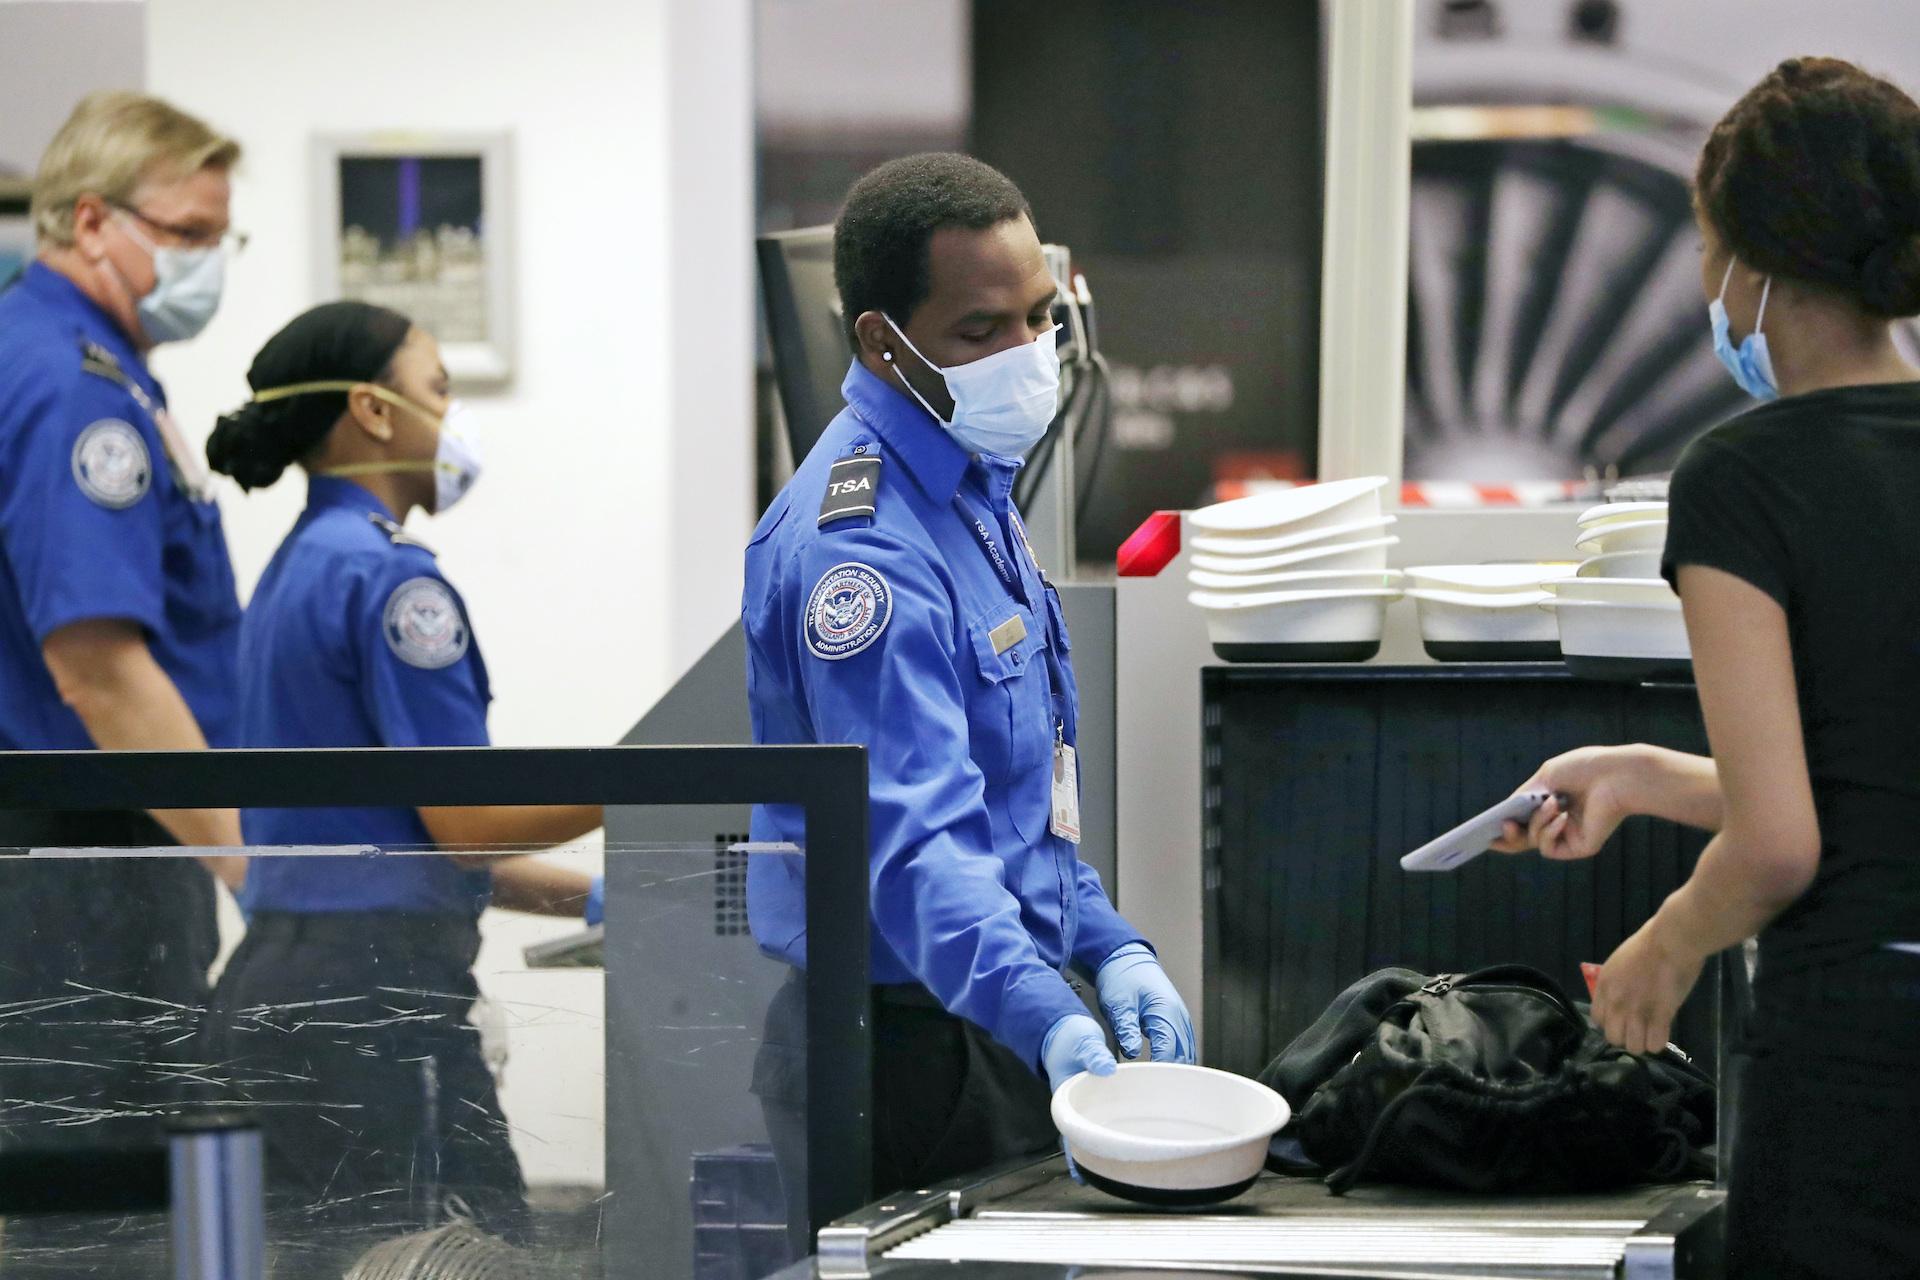 TSA officers wear protective masks at a security screening area at Seattle-Tacoma International Airport Monday, May 18, 2020, in SeaTac, Wash. (AP Photo/Elaine Thompson)